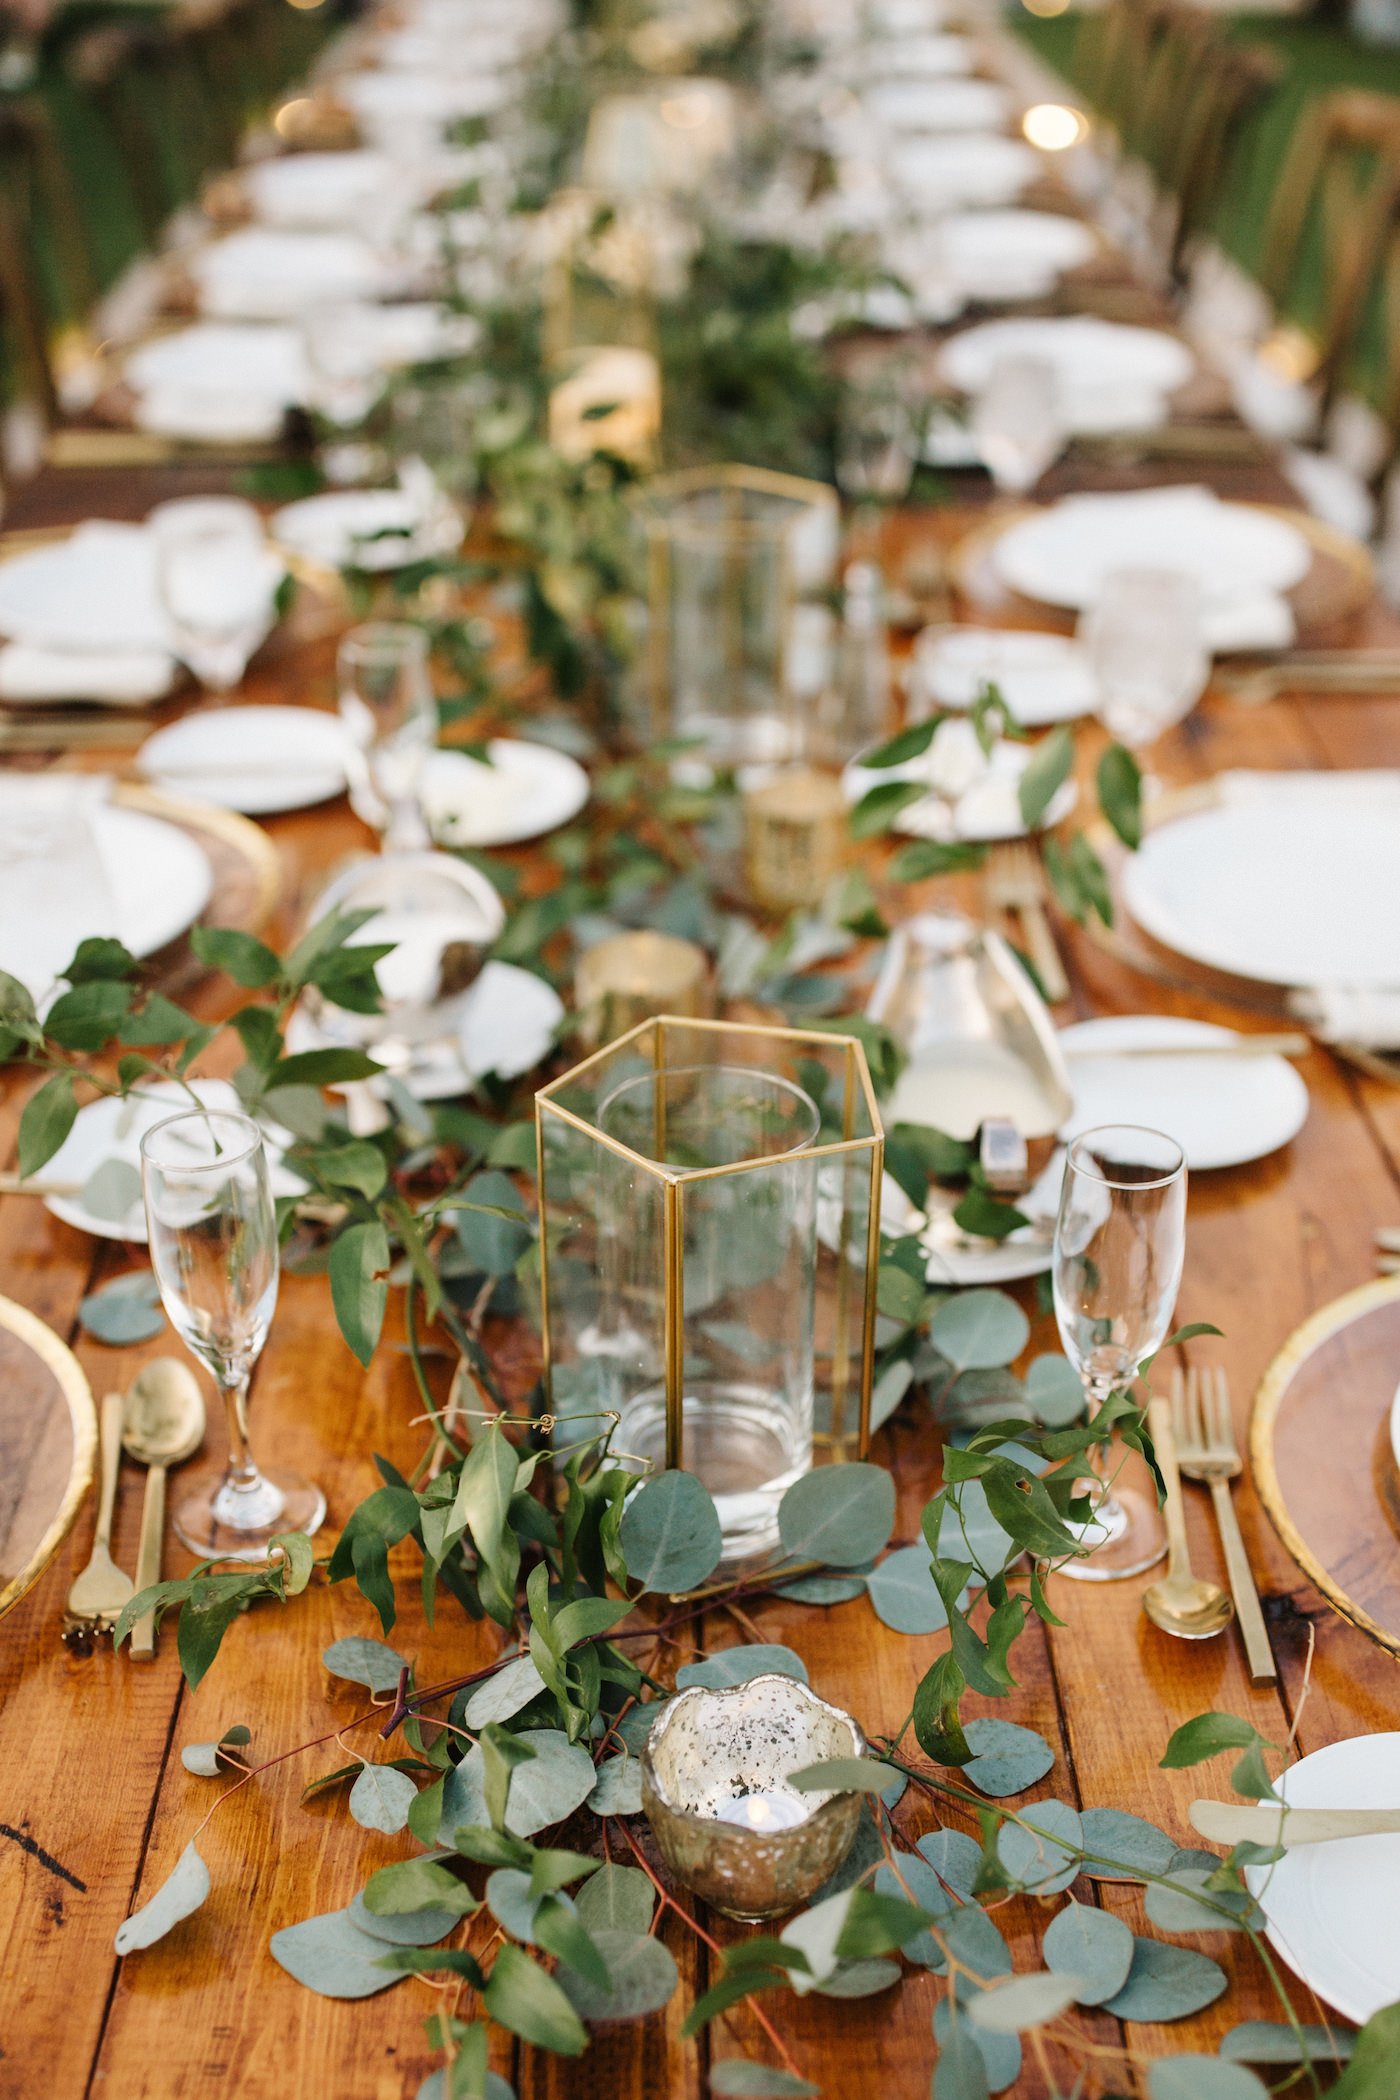 Bohemian Beach Inspired Wedding Reception and Decor, Wedding Party Farmhouse Feasting Table with Greenery Eucalyptus Garland Centerpieces, Geometric Modern Vases | Tampa Bay Luxury Wedding Planner Parties A’ La Carte | Rentals A Chair Affair and Over the Top Rental Linens